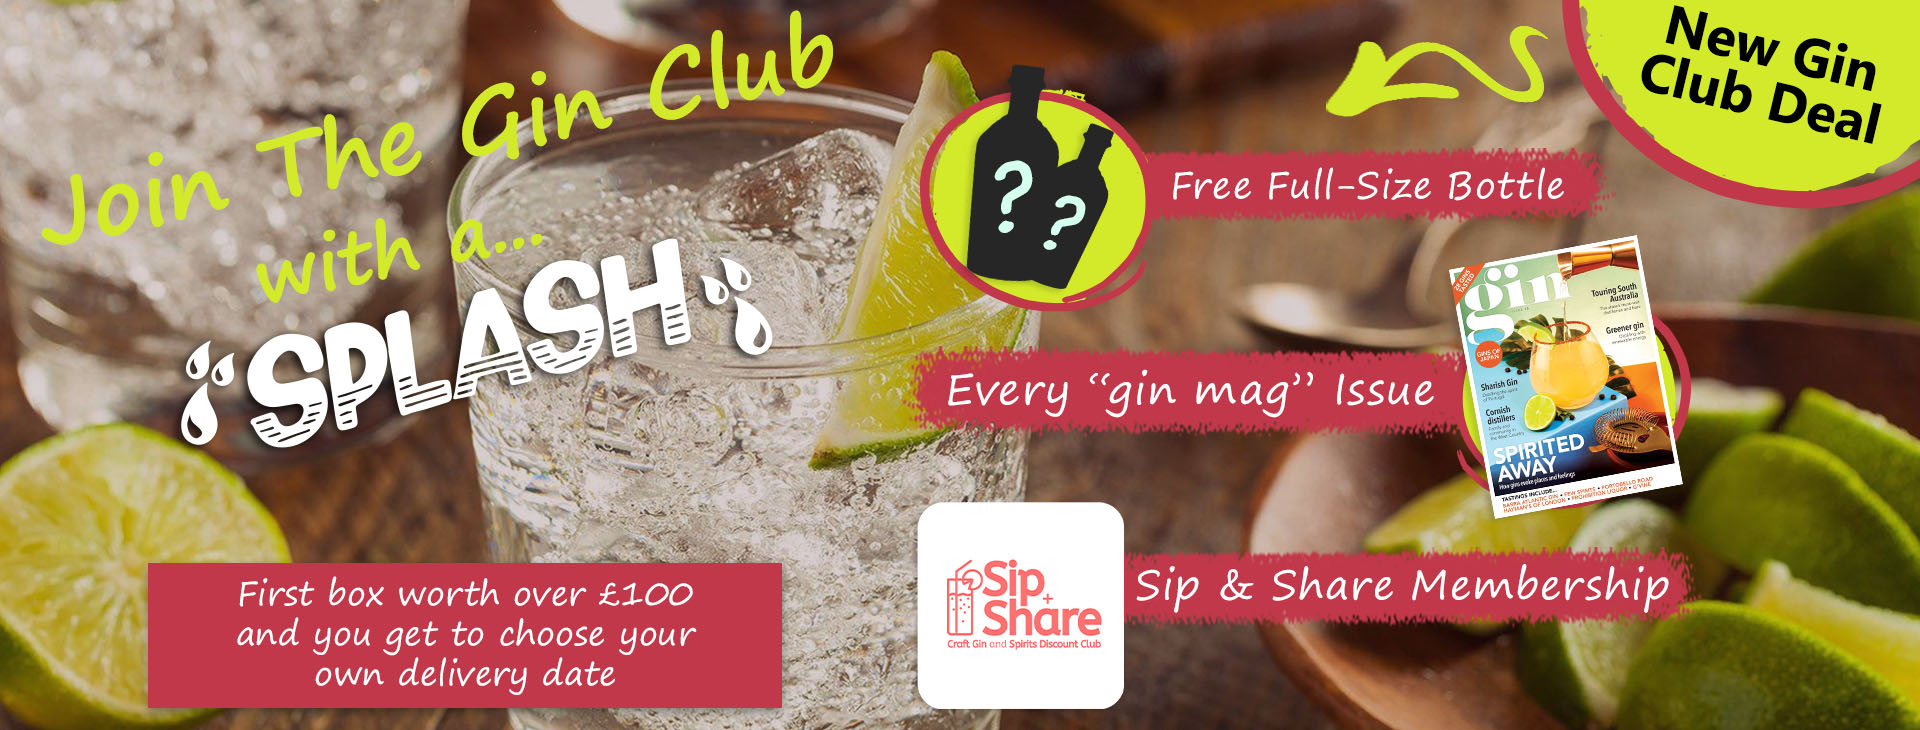 Join the Gin Club with a Splash today